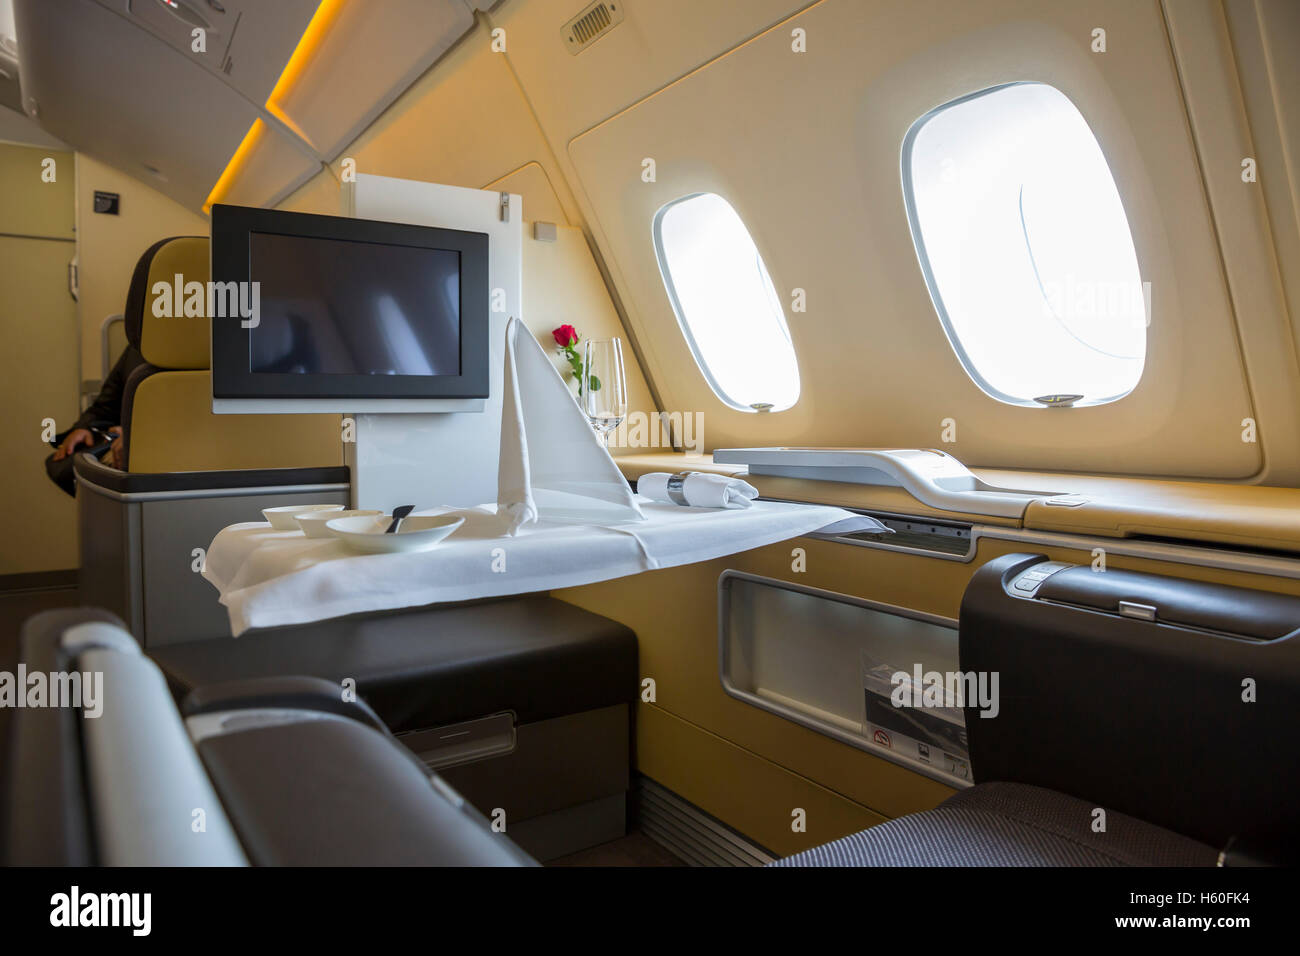 Sofia, Bulgaria - October 16, 2016: The inside of Lufthansa Airbus A380 airplane. The Airbus A380 is a double-deck, wide-body, f Stock Photo